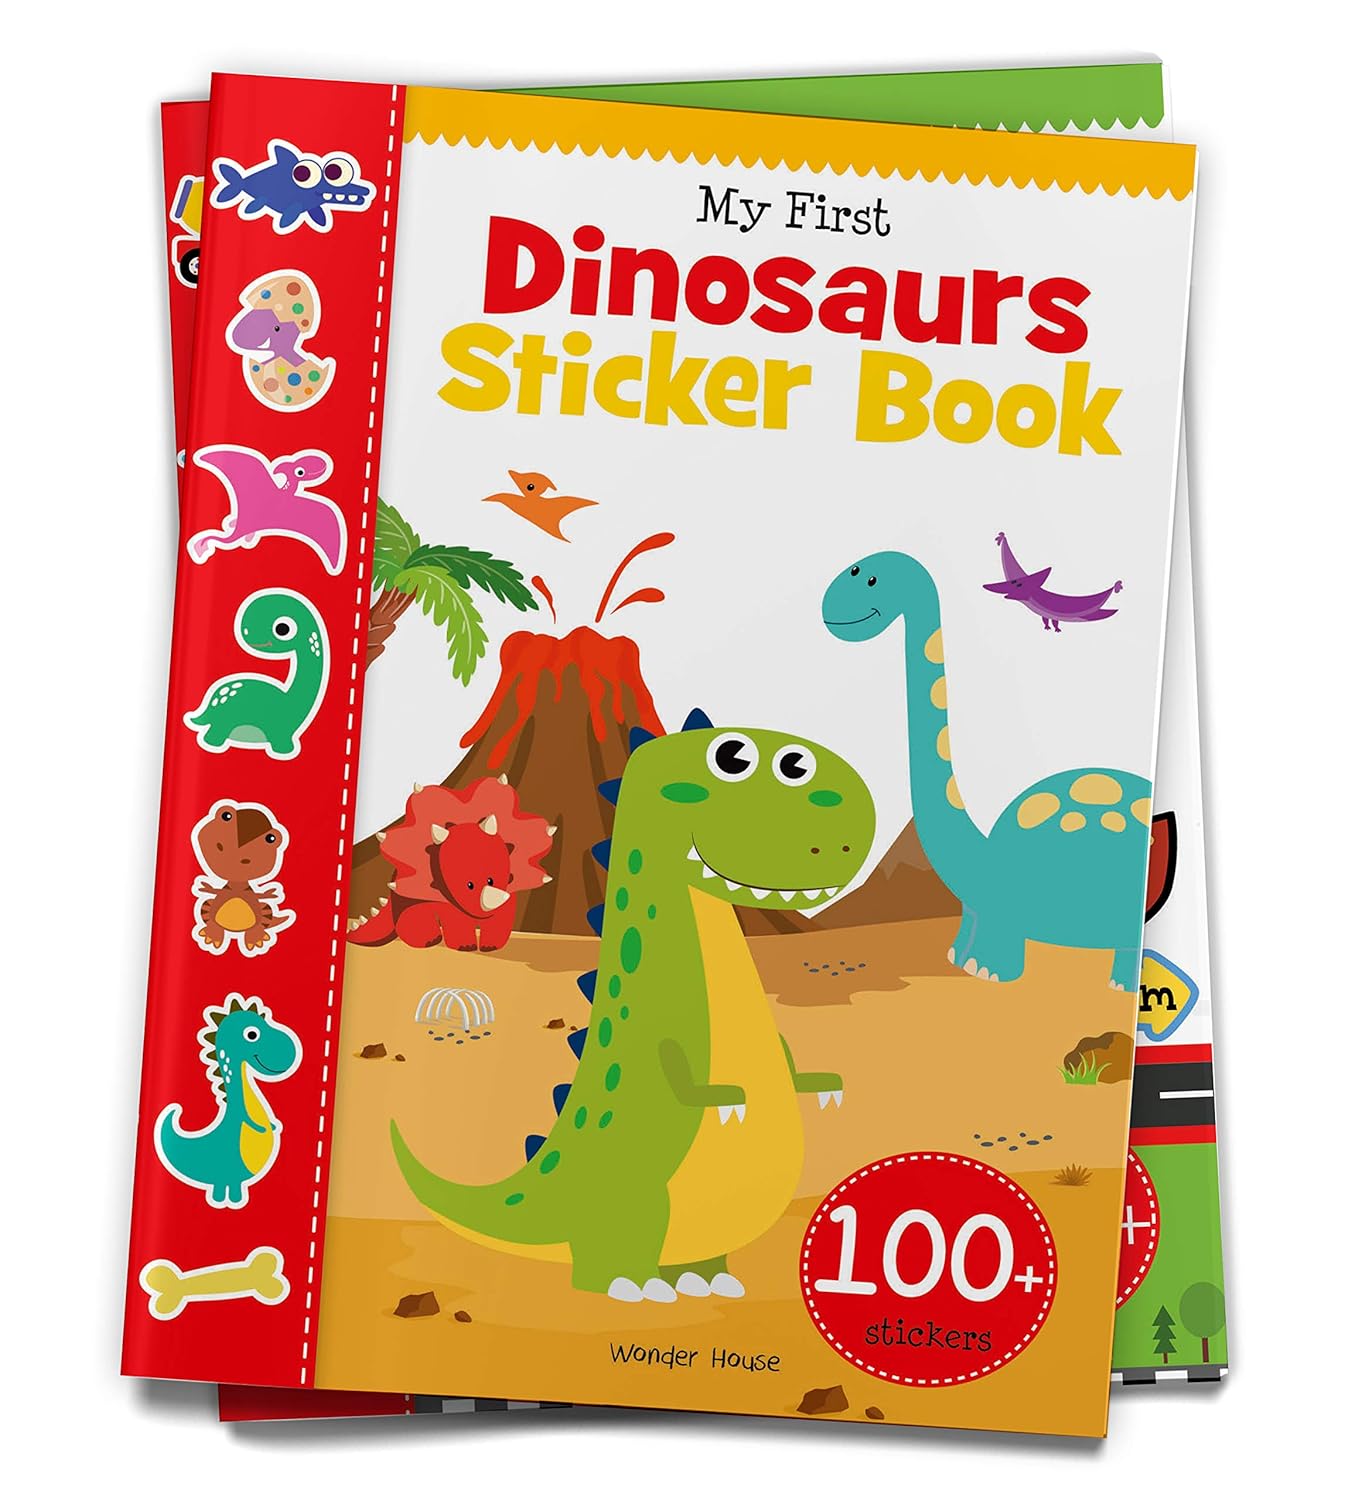 My First Dinosaurs Sticker Book: with 100+ Stickers